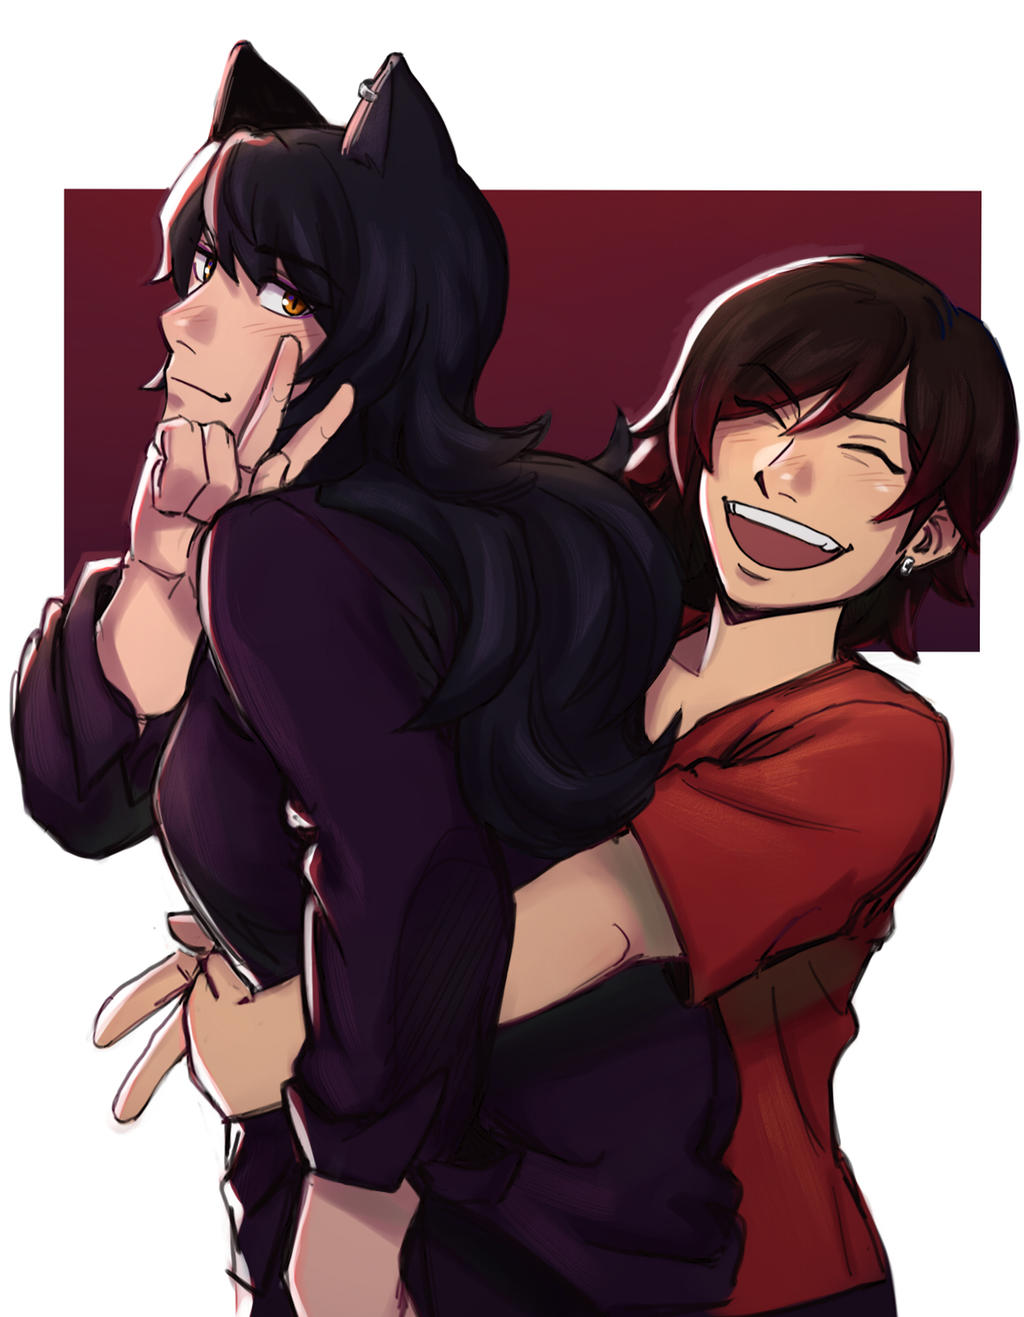 Blek and Rubs by NaitouRSE on DeviantArt